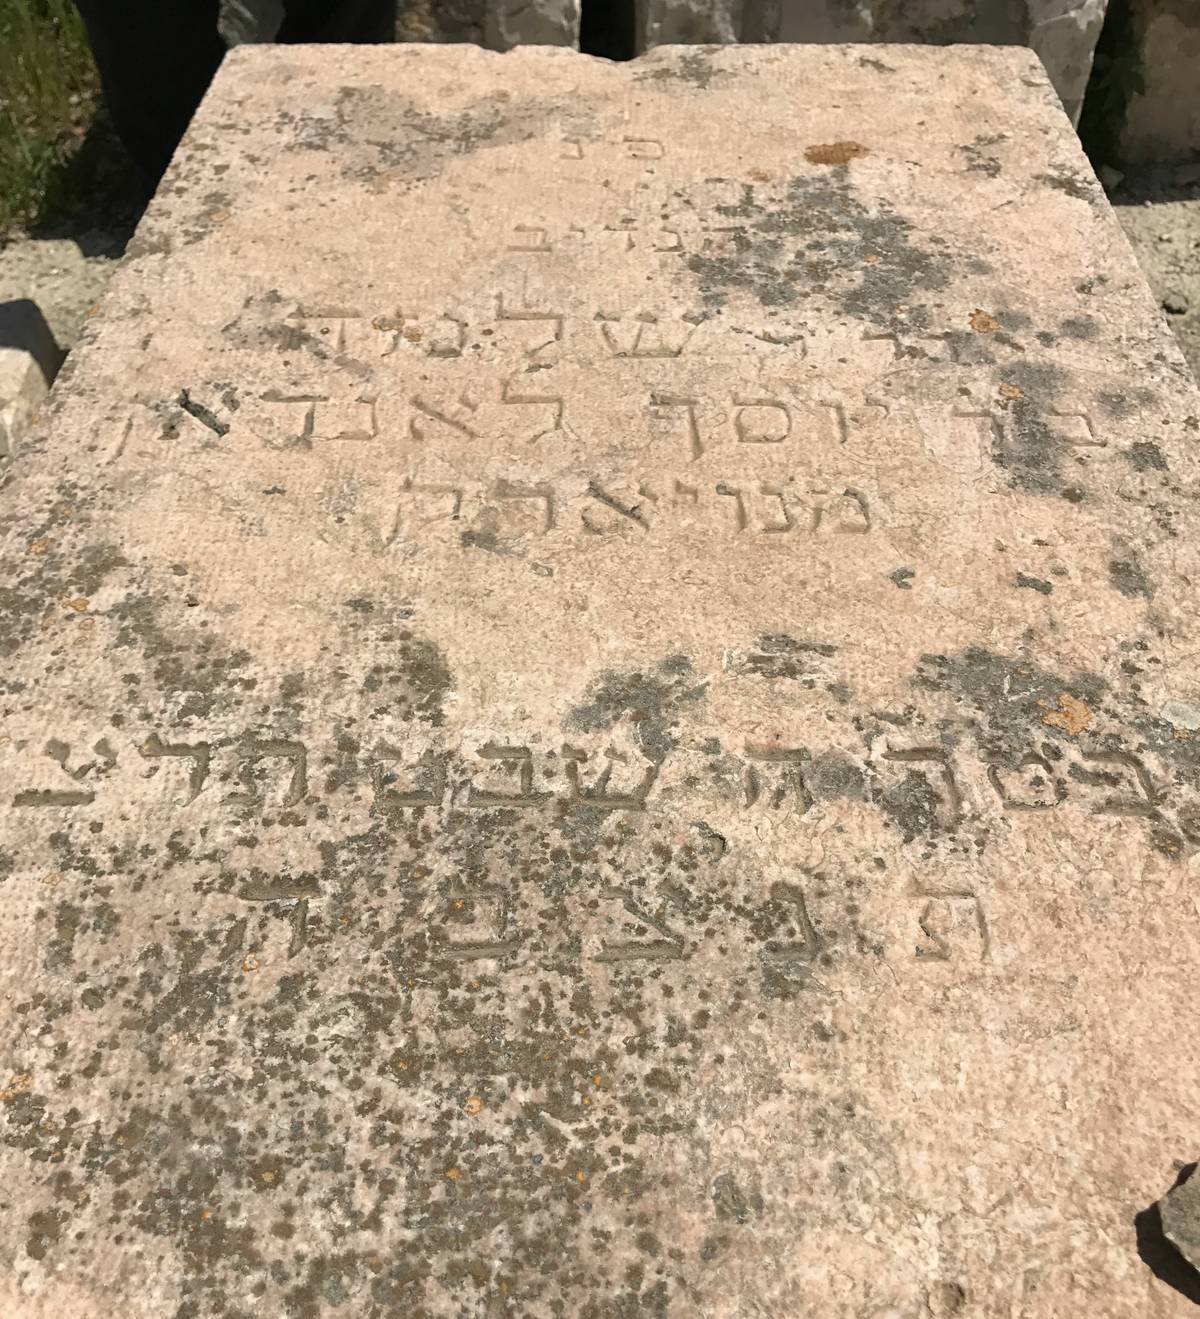 The grave of the author’s great-grandfather, Solomon Landowne. (Image courtesy of the author)